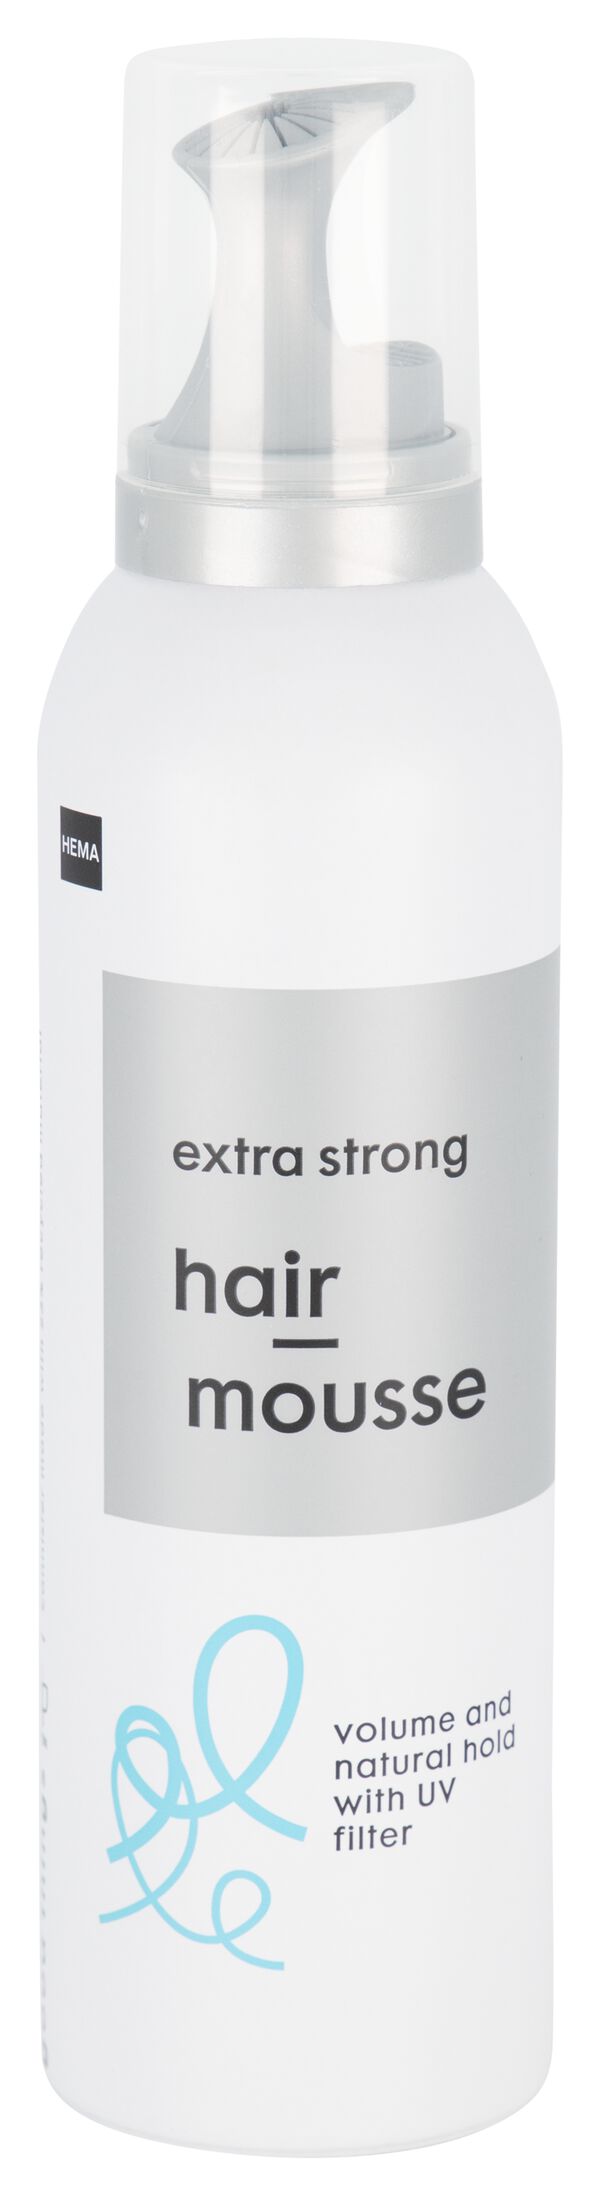 mousse cheveux extra strong 200 ml - 11077103 - HEMA